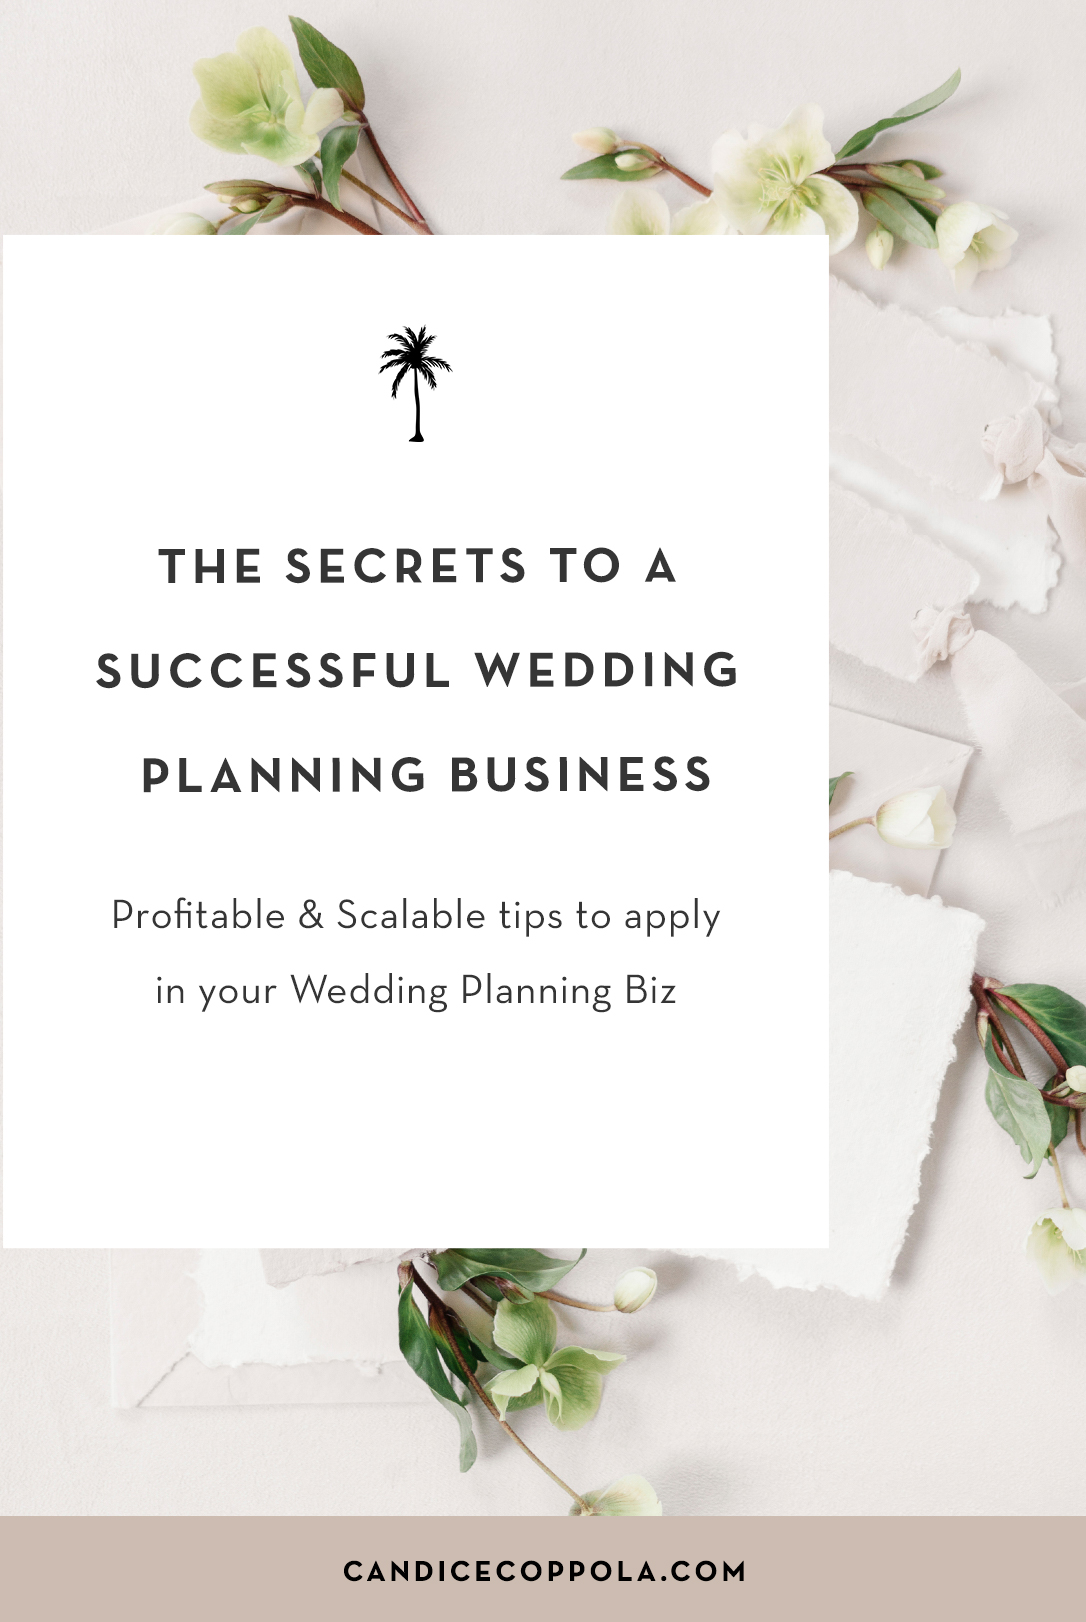 i want to start a wedding planning business